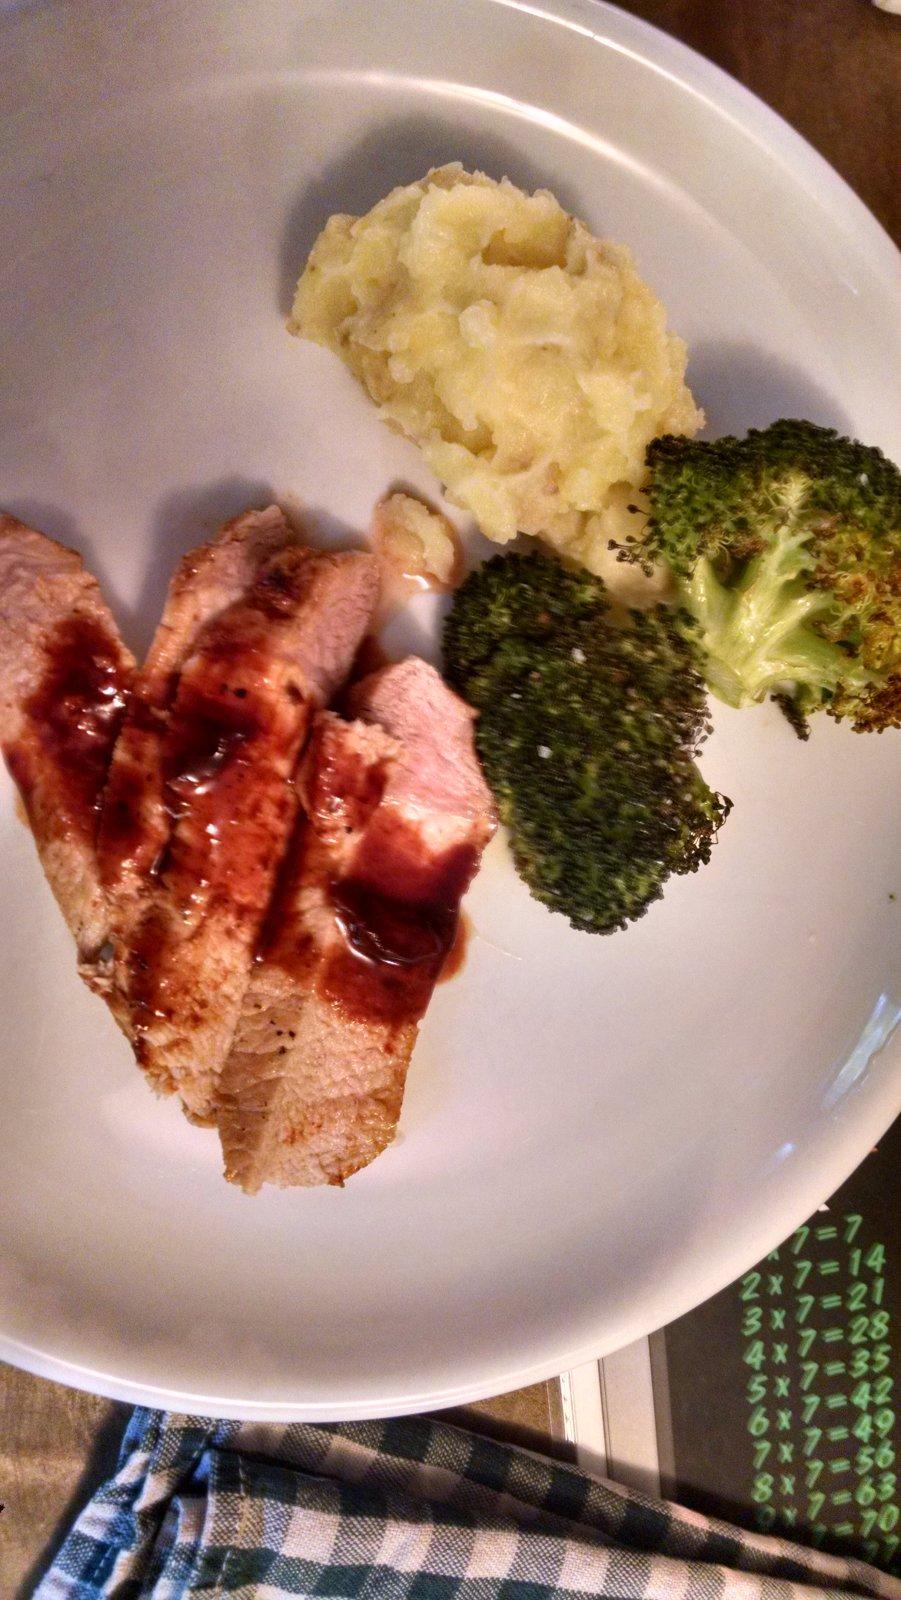 Chipotle-Glazed Pork Chops with Garlic Mashed Potatoes and Roasted Broccoli (from the previous box)